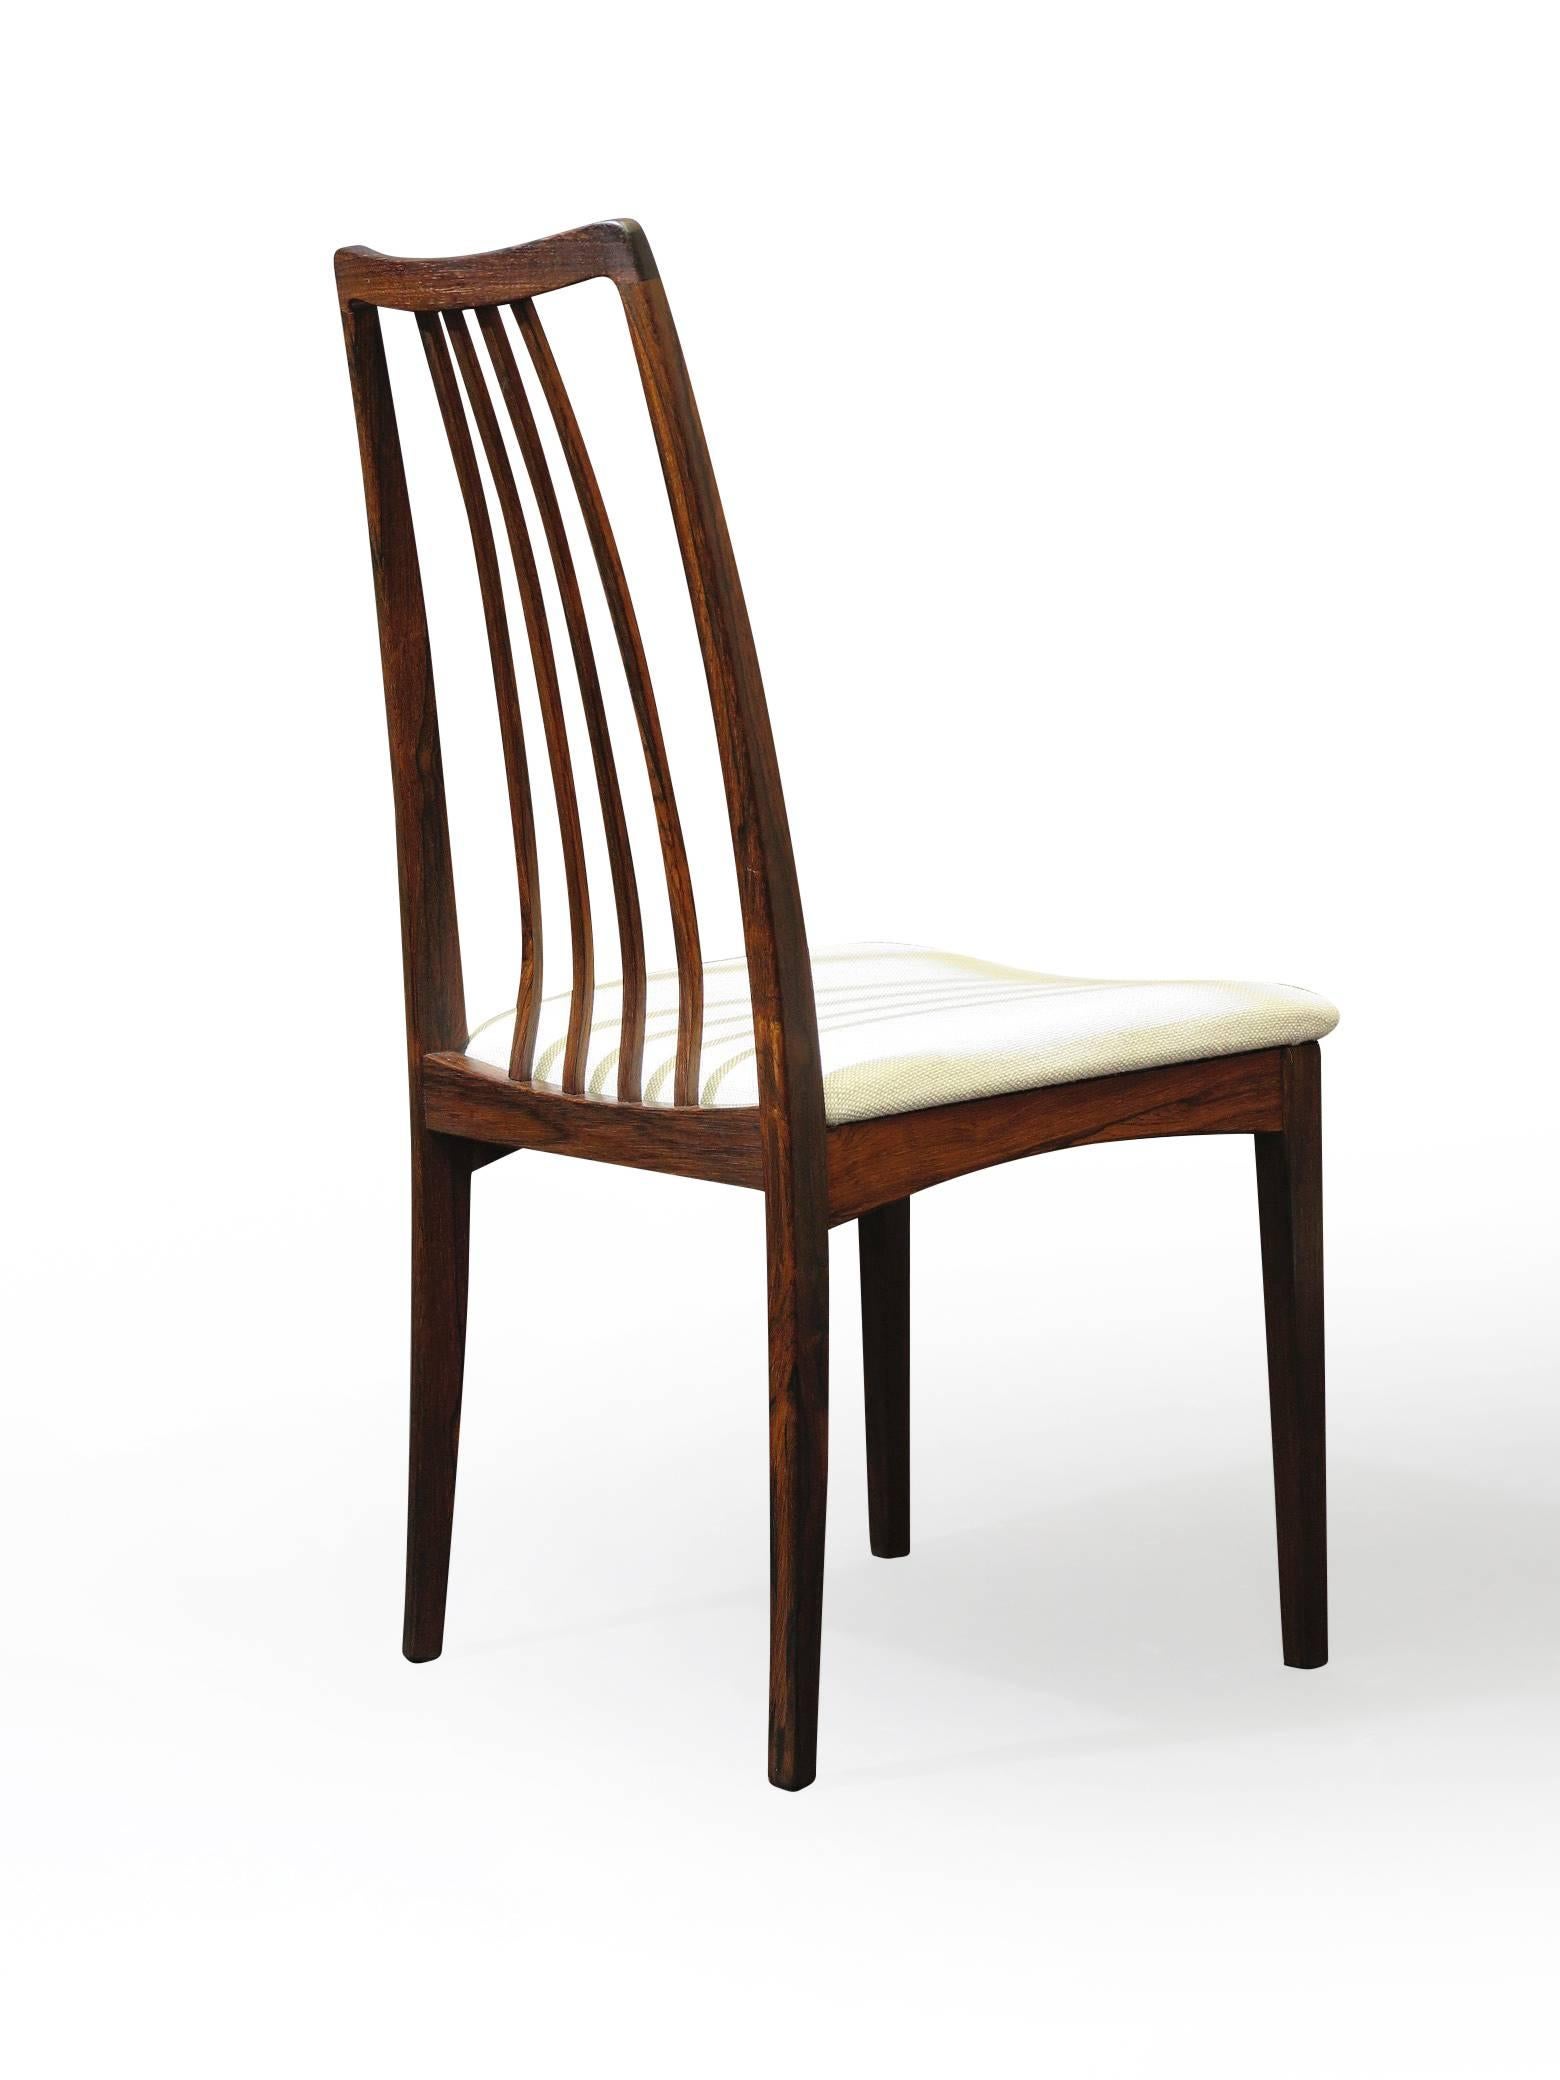 Six mid century Brazilian Rosewood dining chairs designed by Kofoed Larsen. Dark grain with elegant spindle back rests and newly upholstered seats in an off-white wool textile.